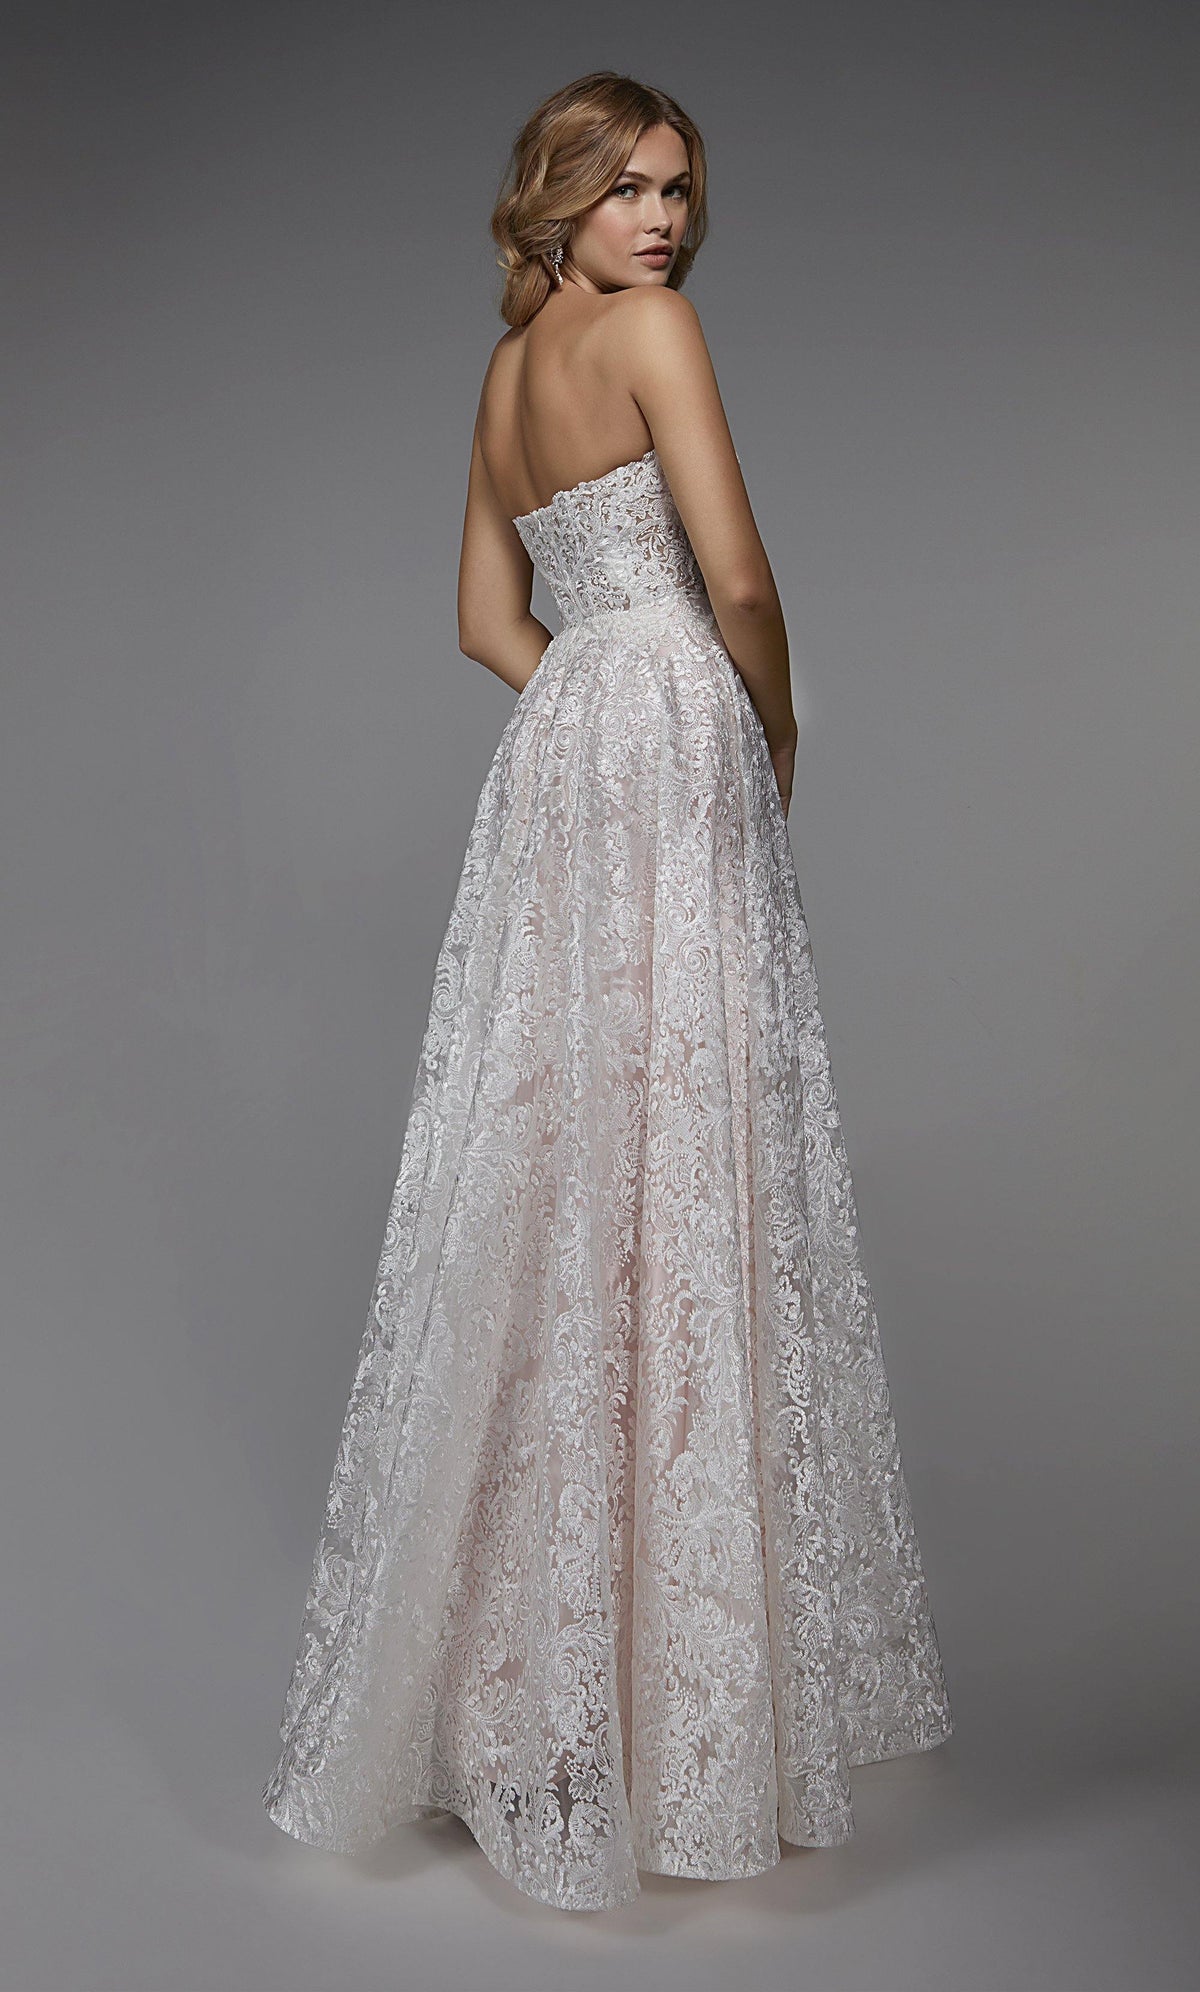 Formal Dress: 7033. Long Bridal Gown, Strapless, A-line, Closed Alyce Paris